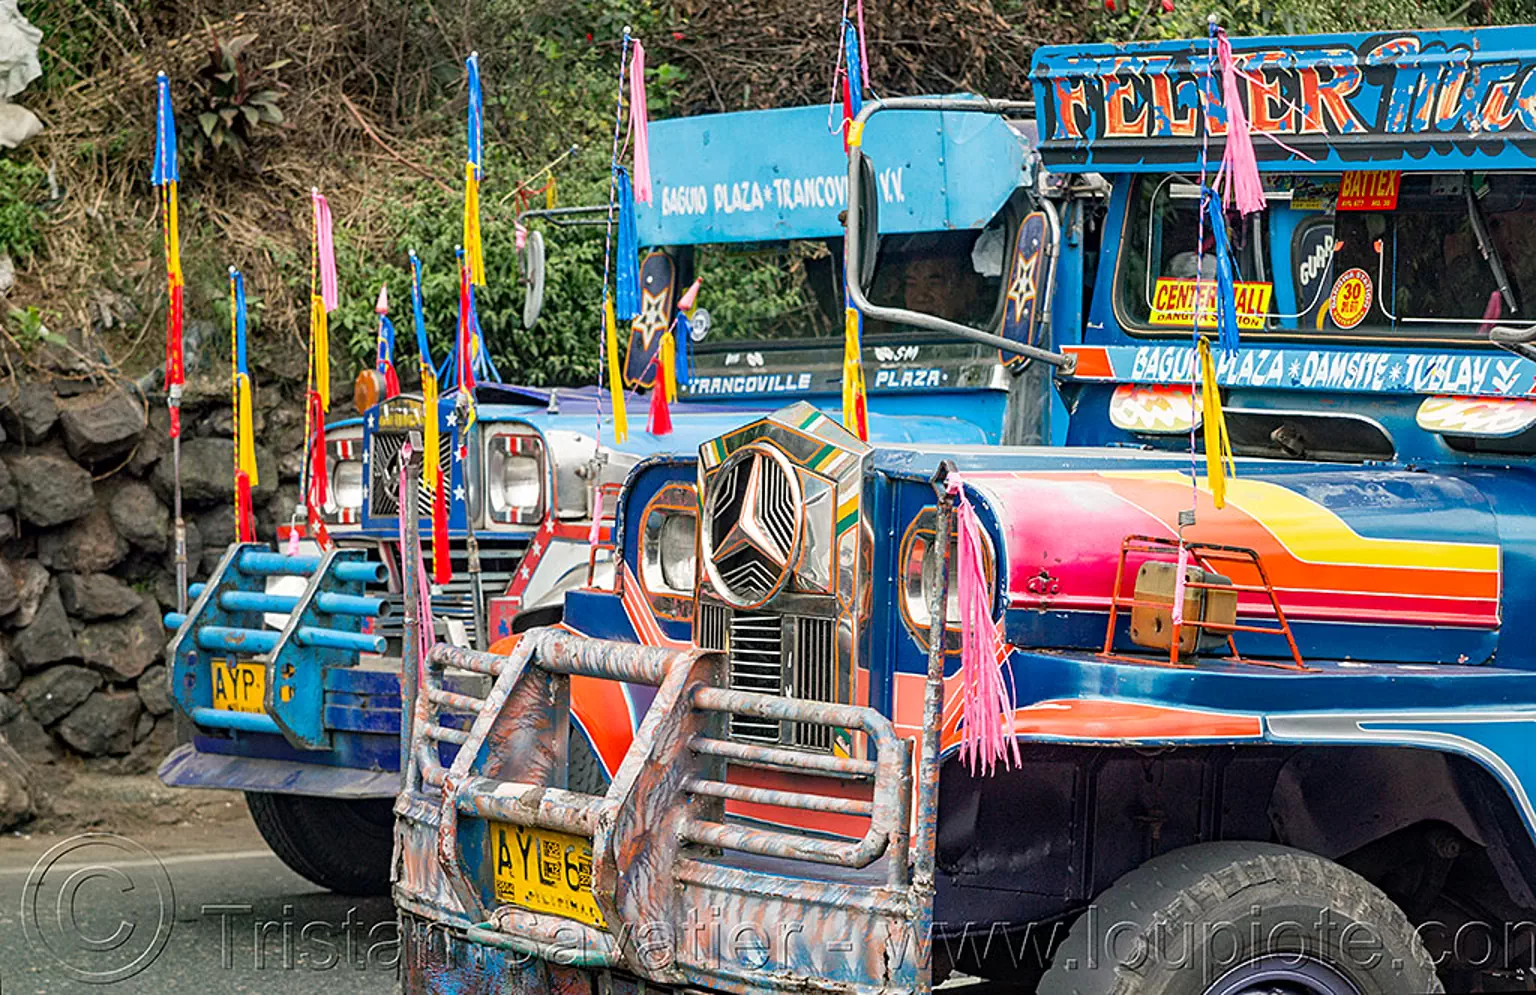 two jeepneys (philippines), baguio, colorful, decorated, jeepney, painted, philippines, road, truck